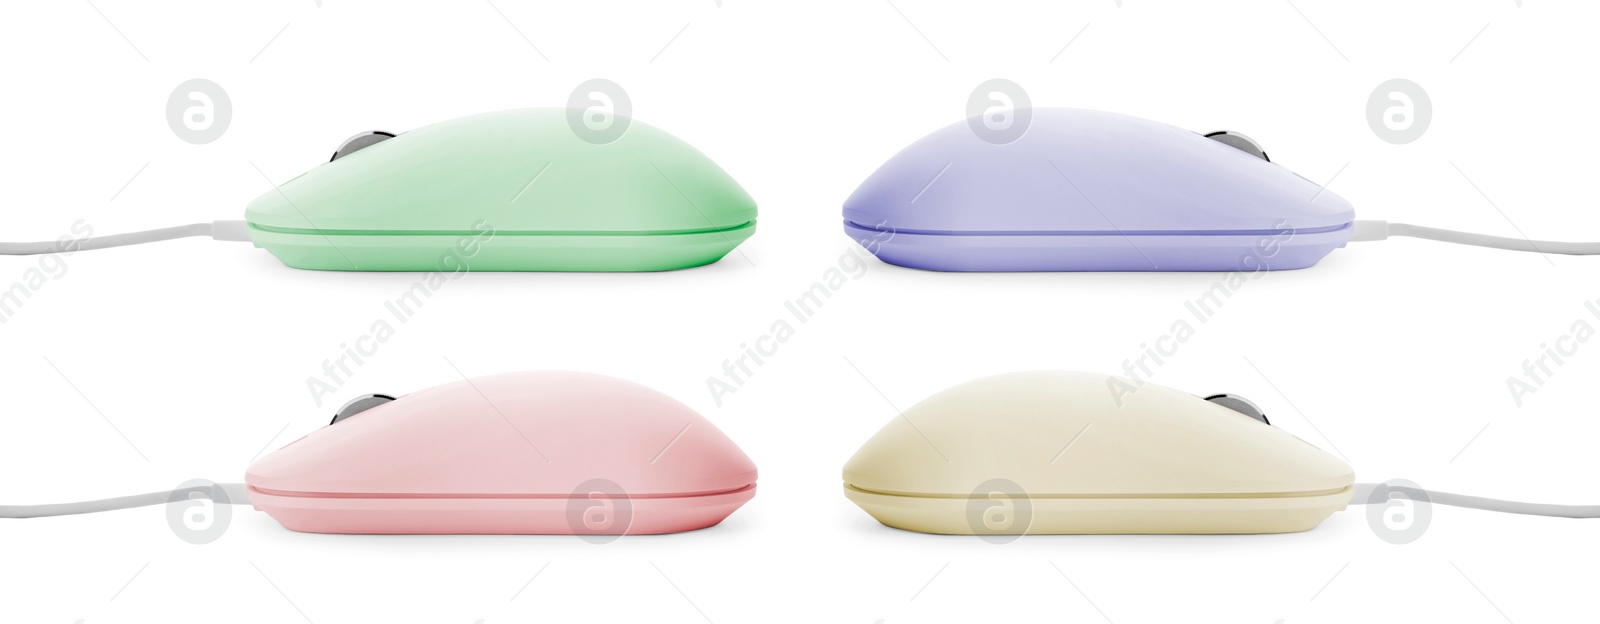 Image of Modern computer mouse on white background, different color variants. Banner design